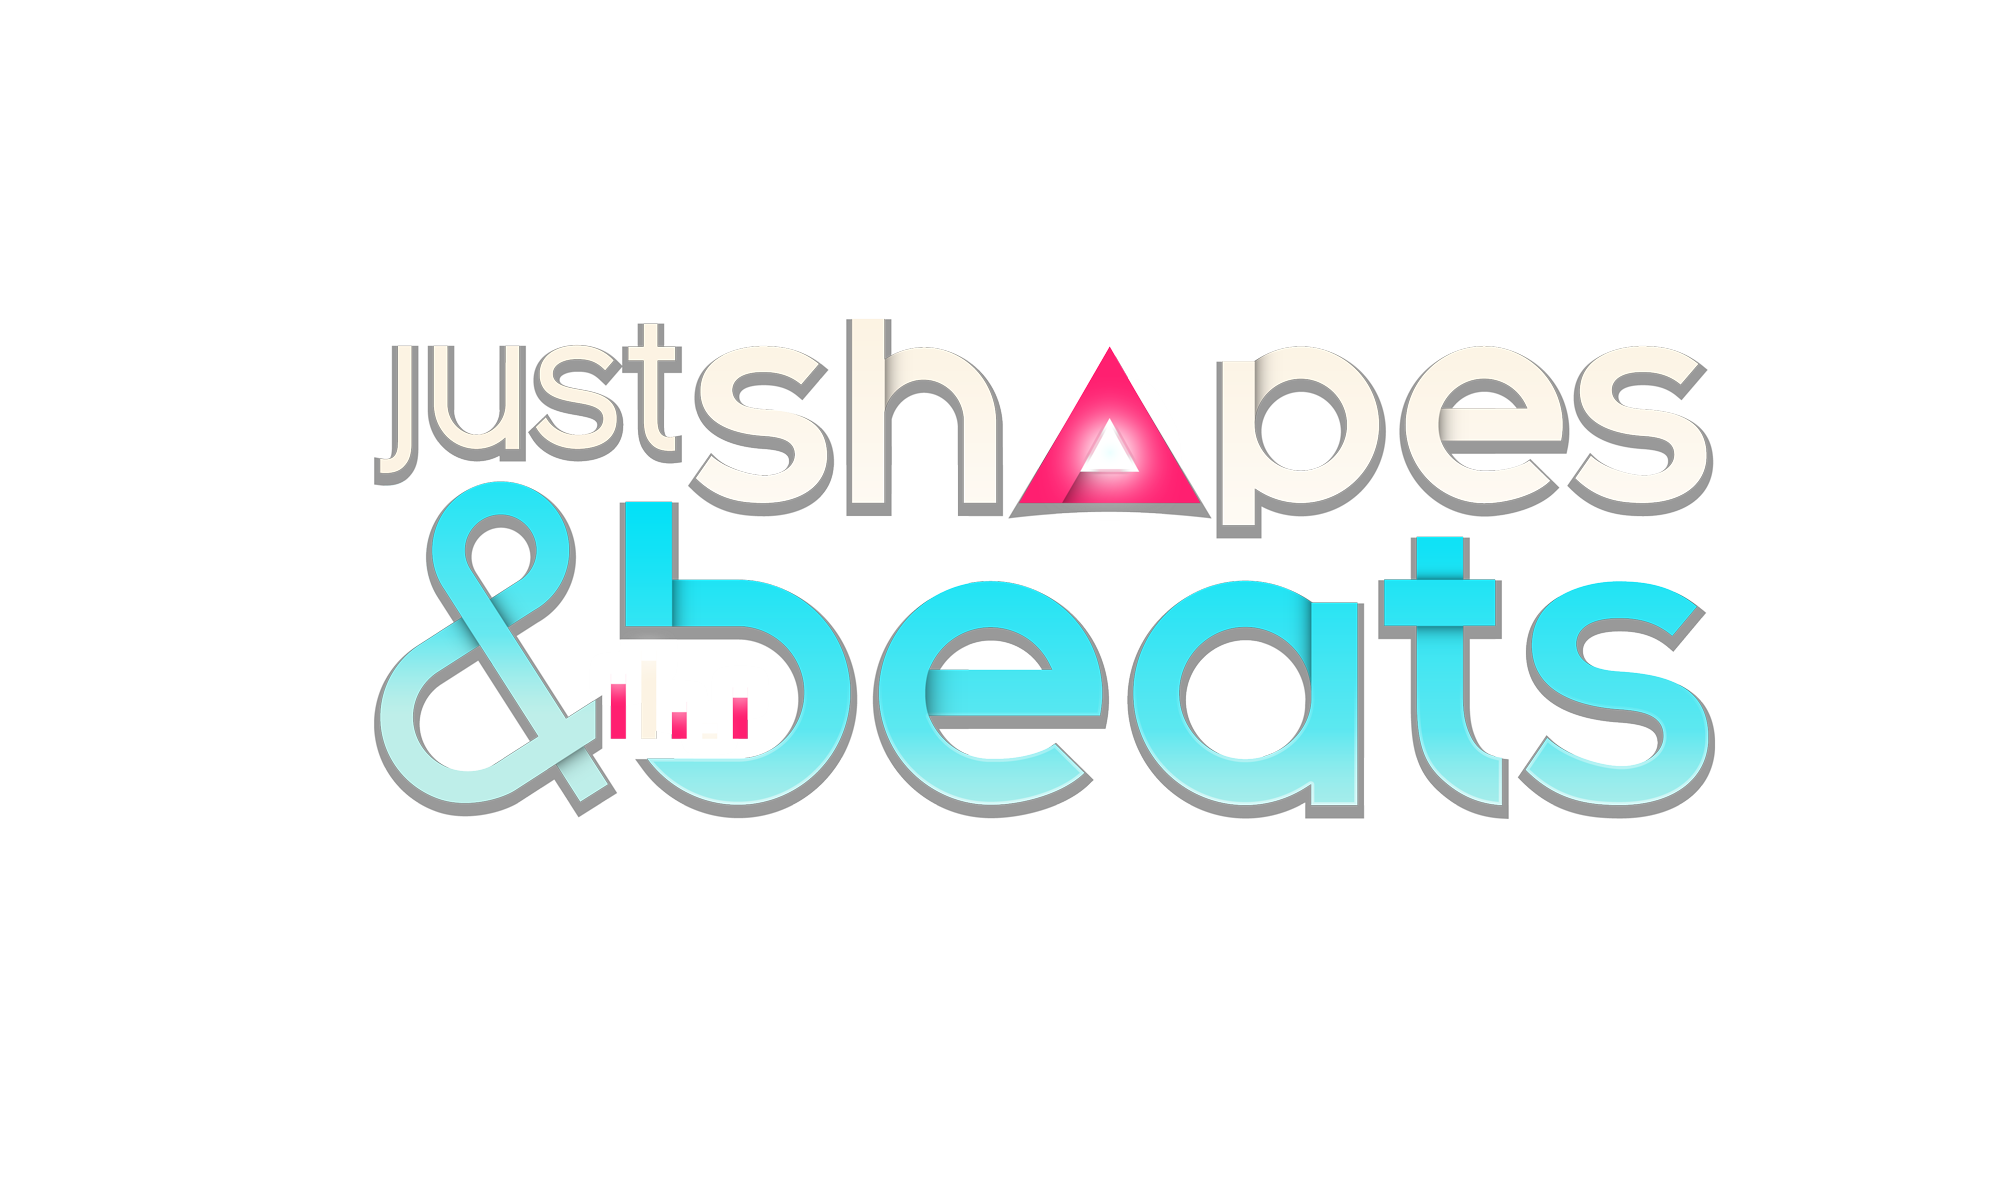 Just shapes and beats download 